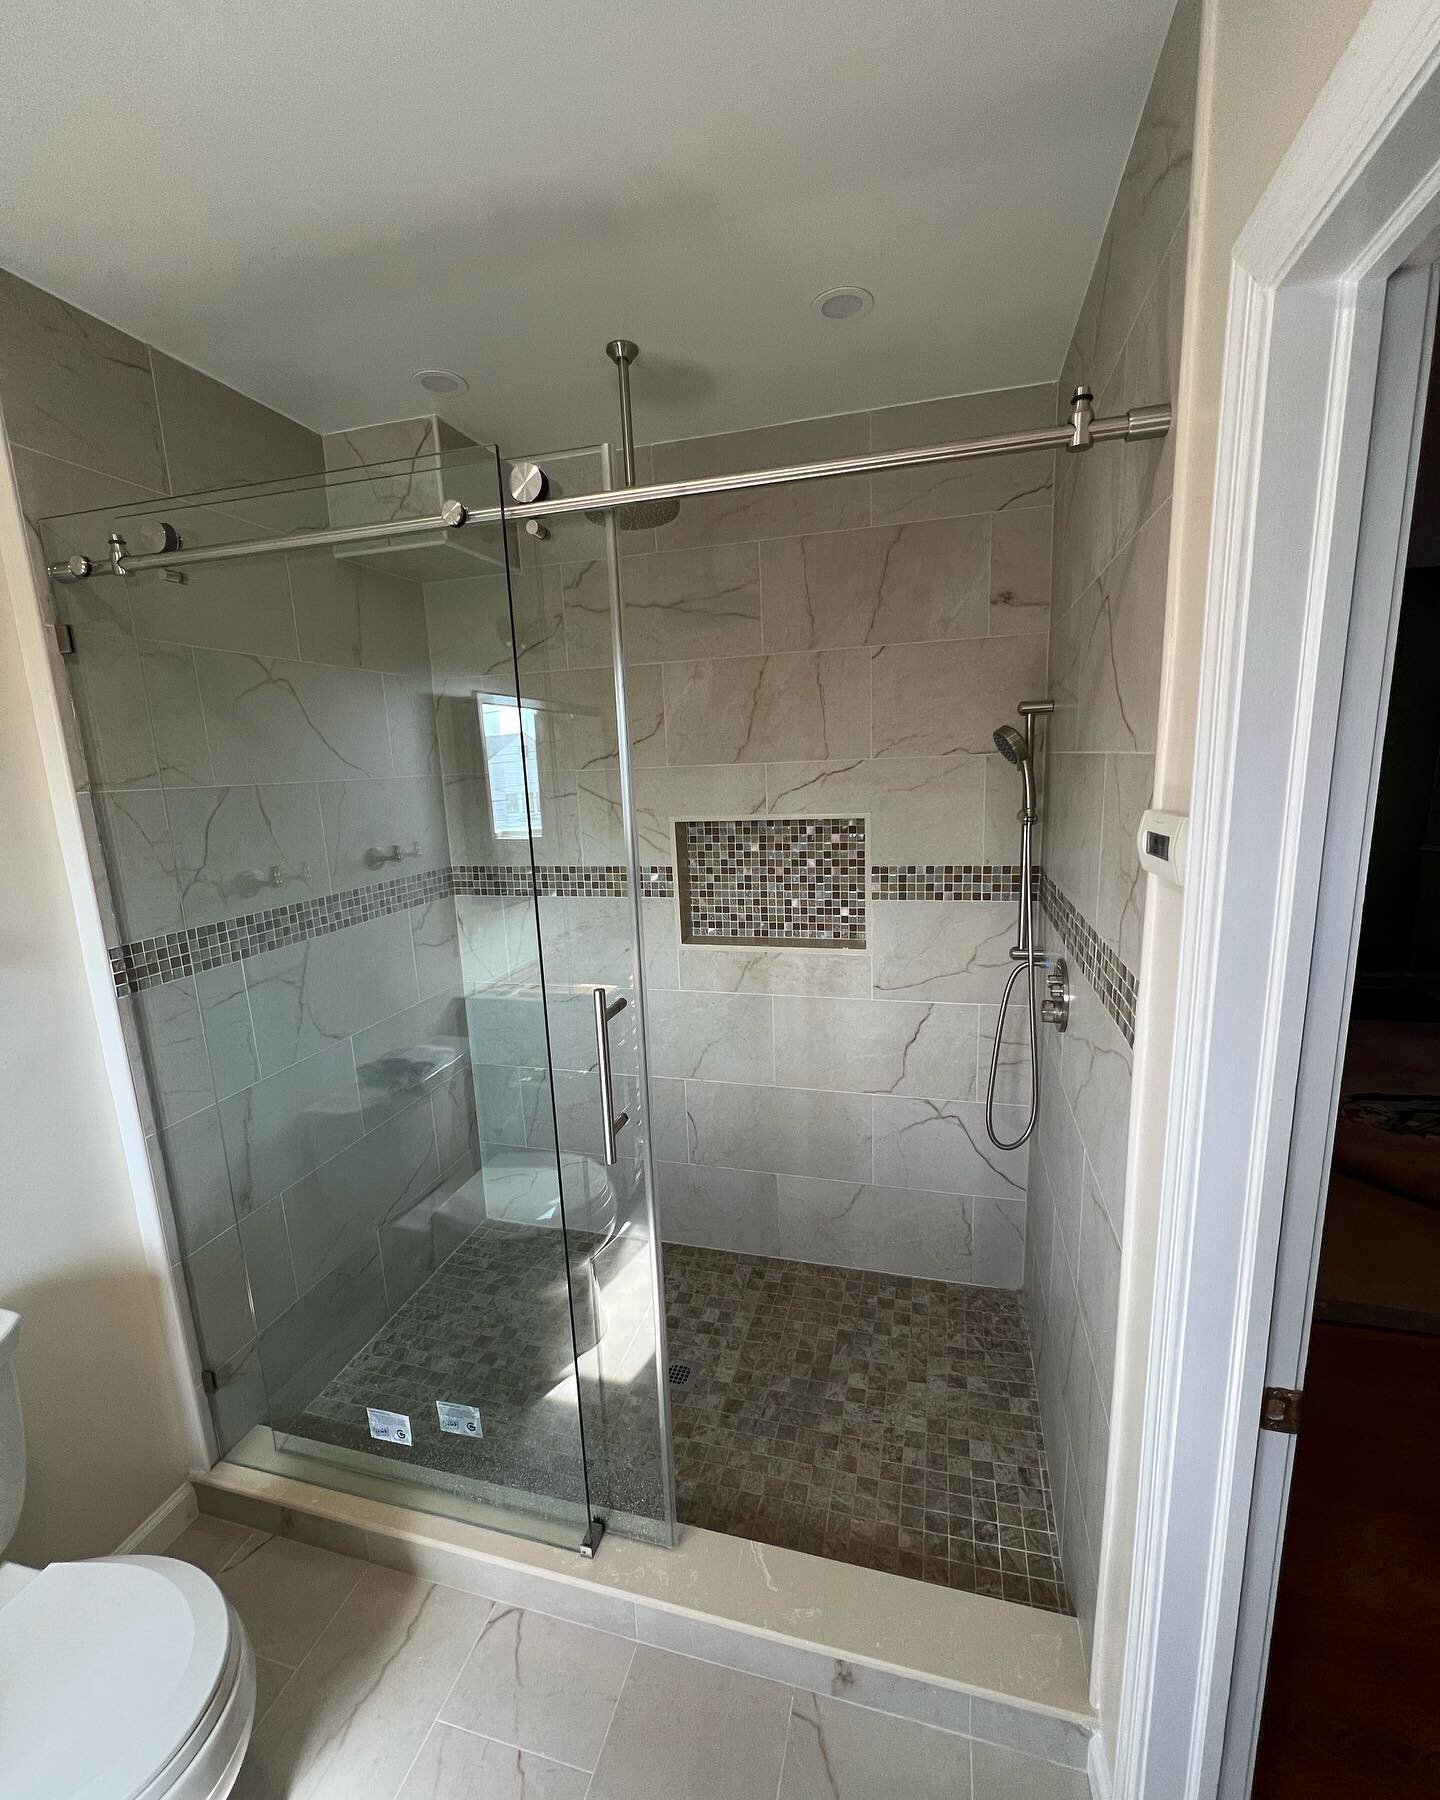 Removed an old tub and installed a custom walk in shower in massapequa. Just waiting on vanity tops to be finished and that&rsquo;ll wrap it all up. More pics to come. #massapequa #longislandcontractor #homerenovation #shower #grohe